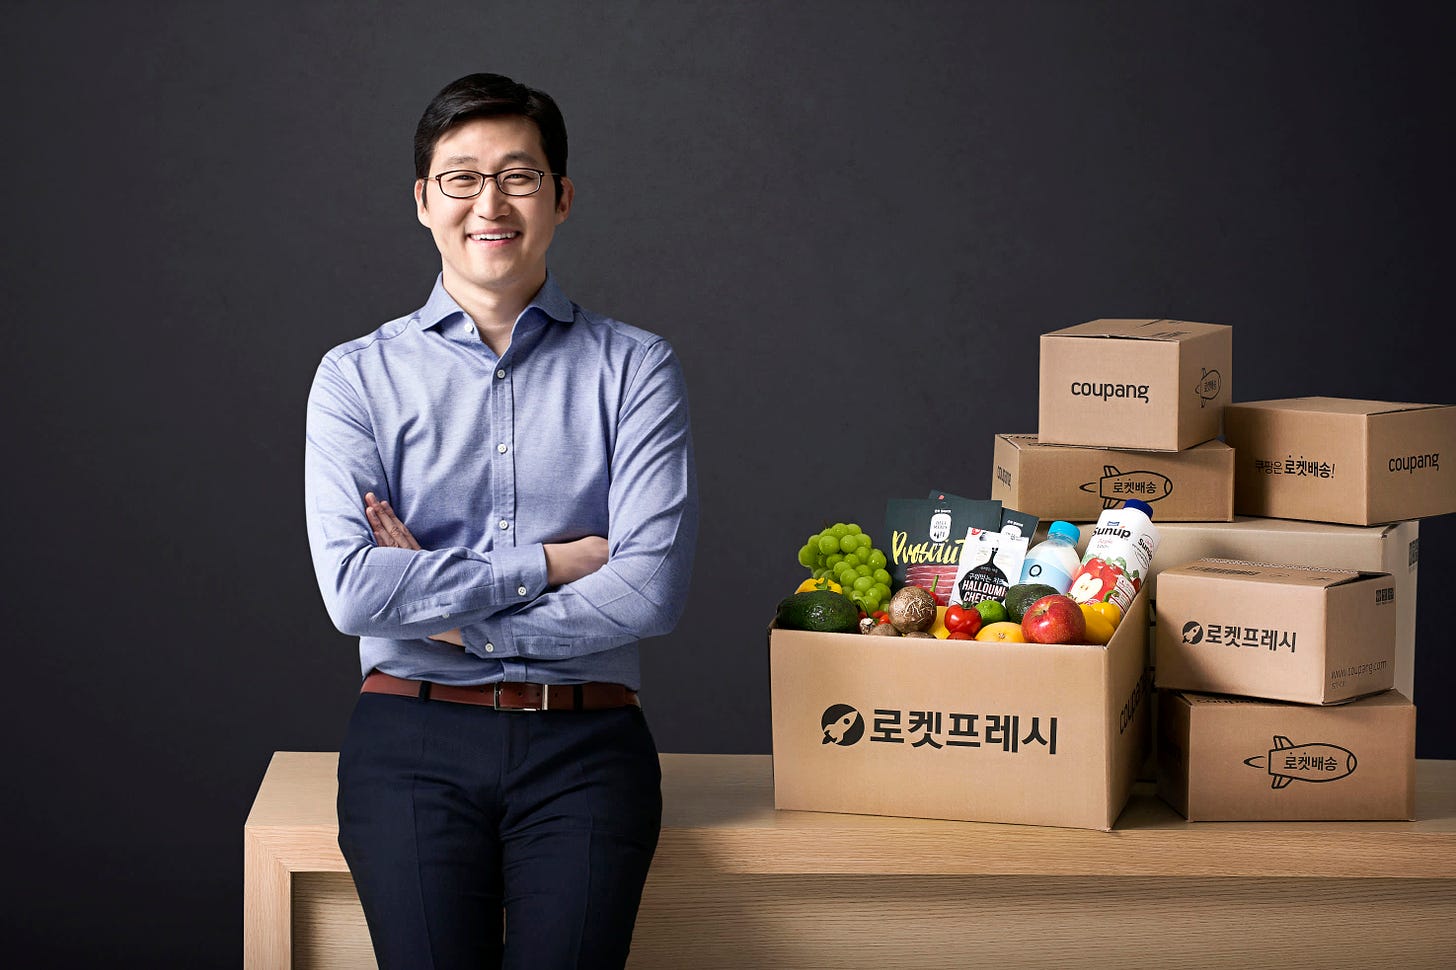 Coupang crushed Amazon to become South Korea's biggest online retailer